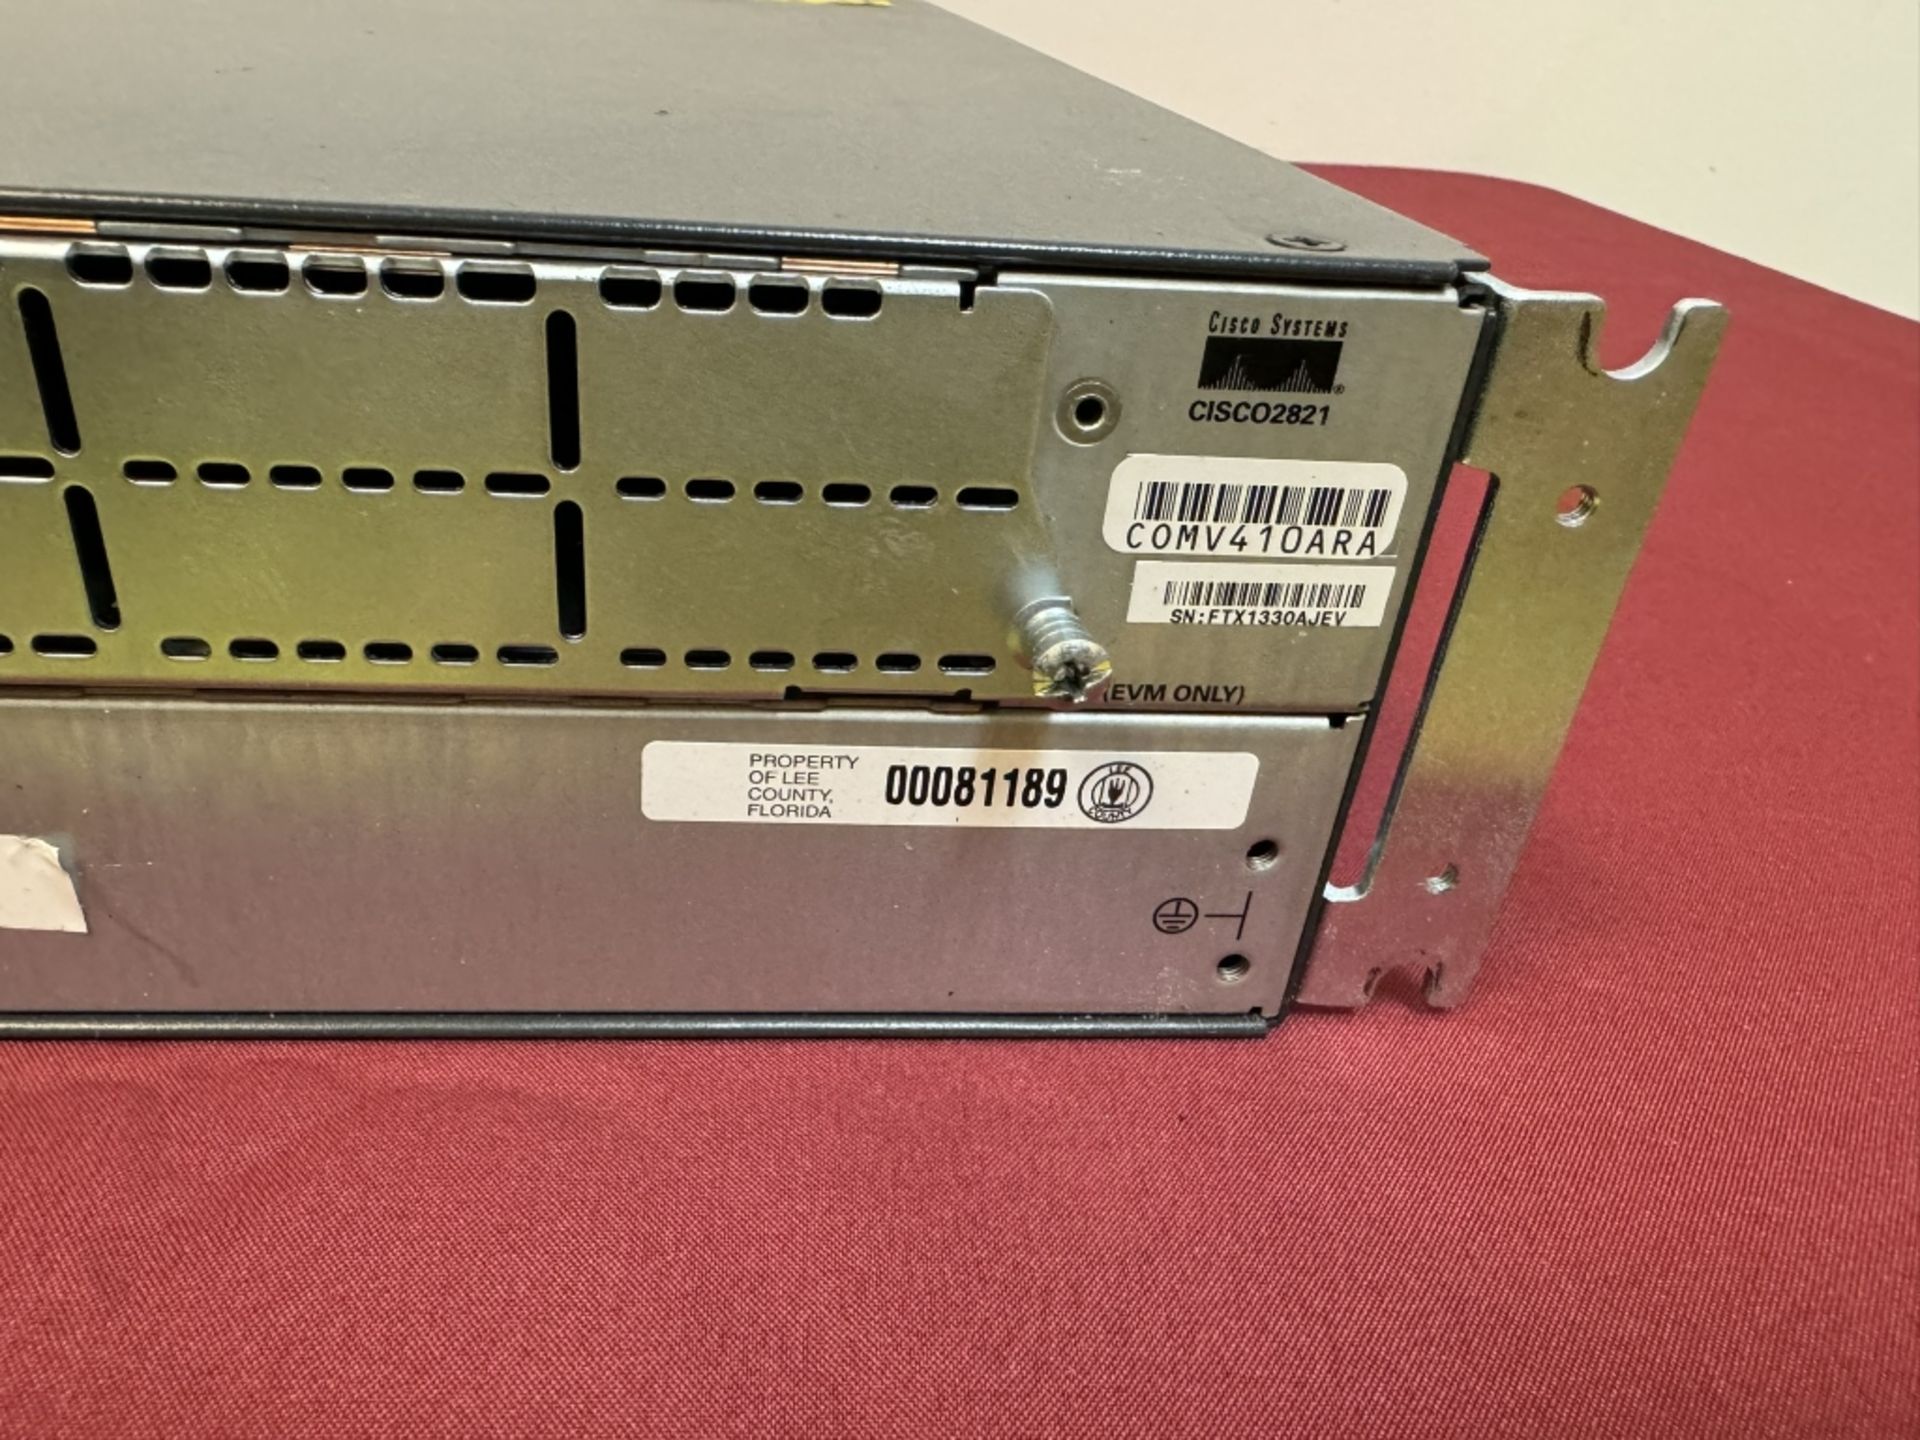 Cisco 2821 Router IOS 15.1, CME 8.5, 1GBD/256F - Image 9 of 9